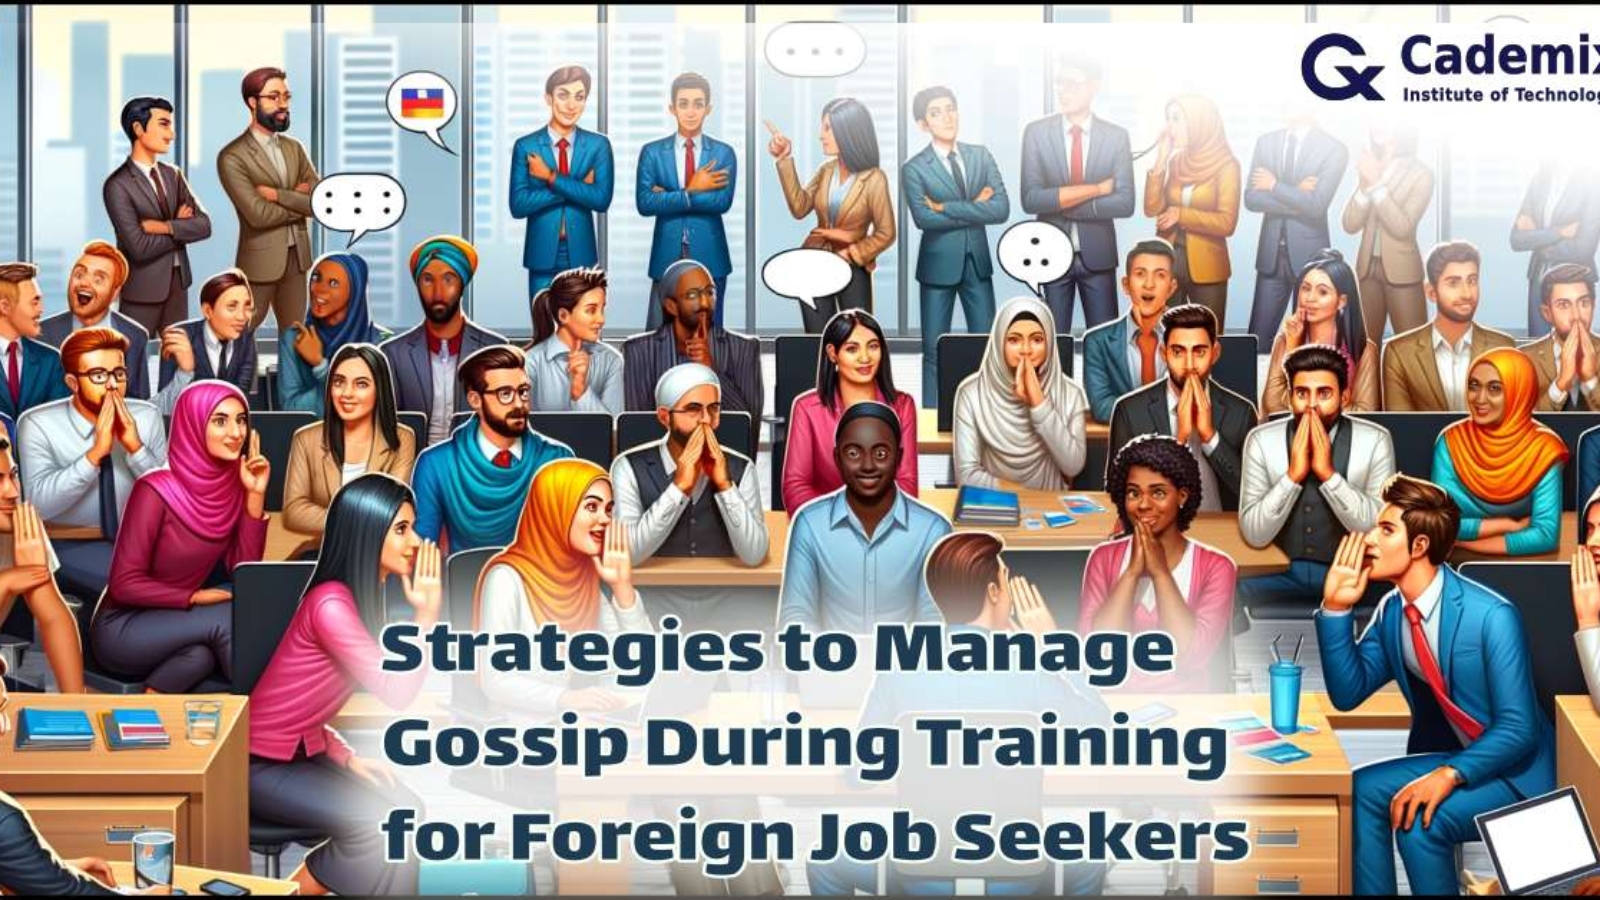 Strategies to Manage Gossip During Training for Foreign Job Seekers